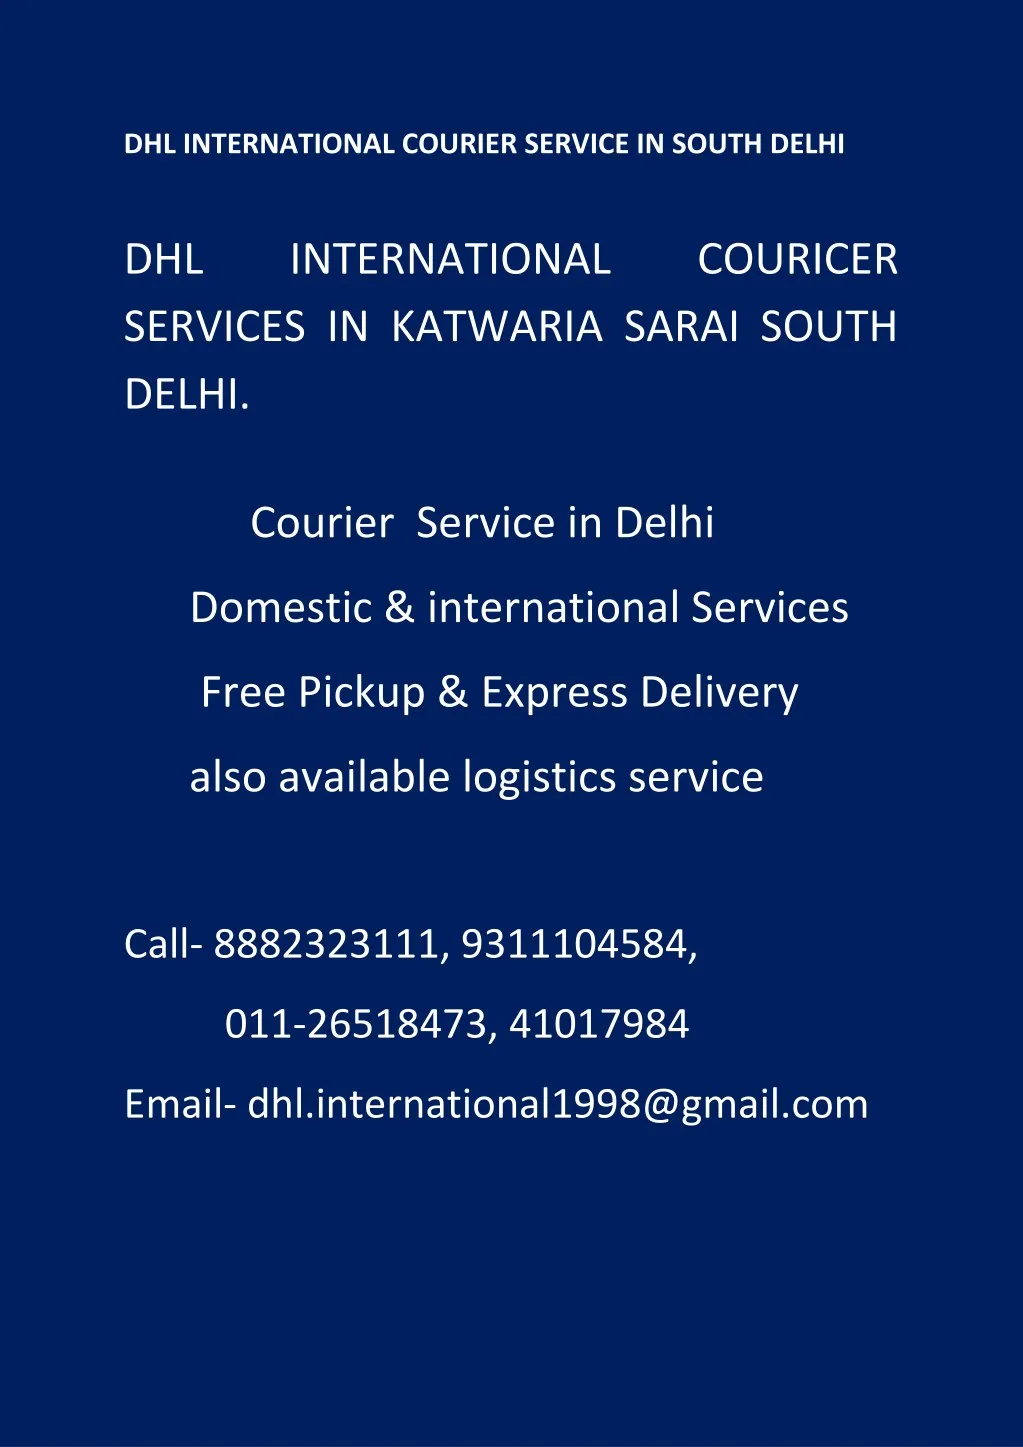 dhl international courier service in south delhi